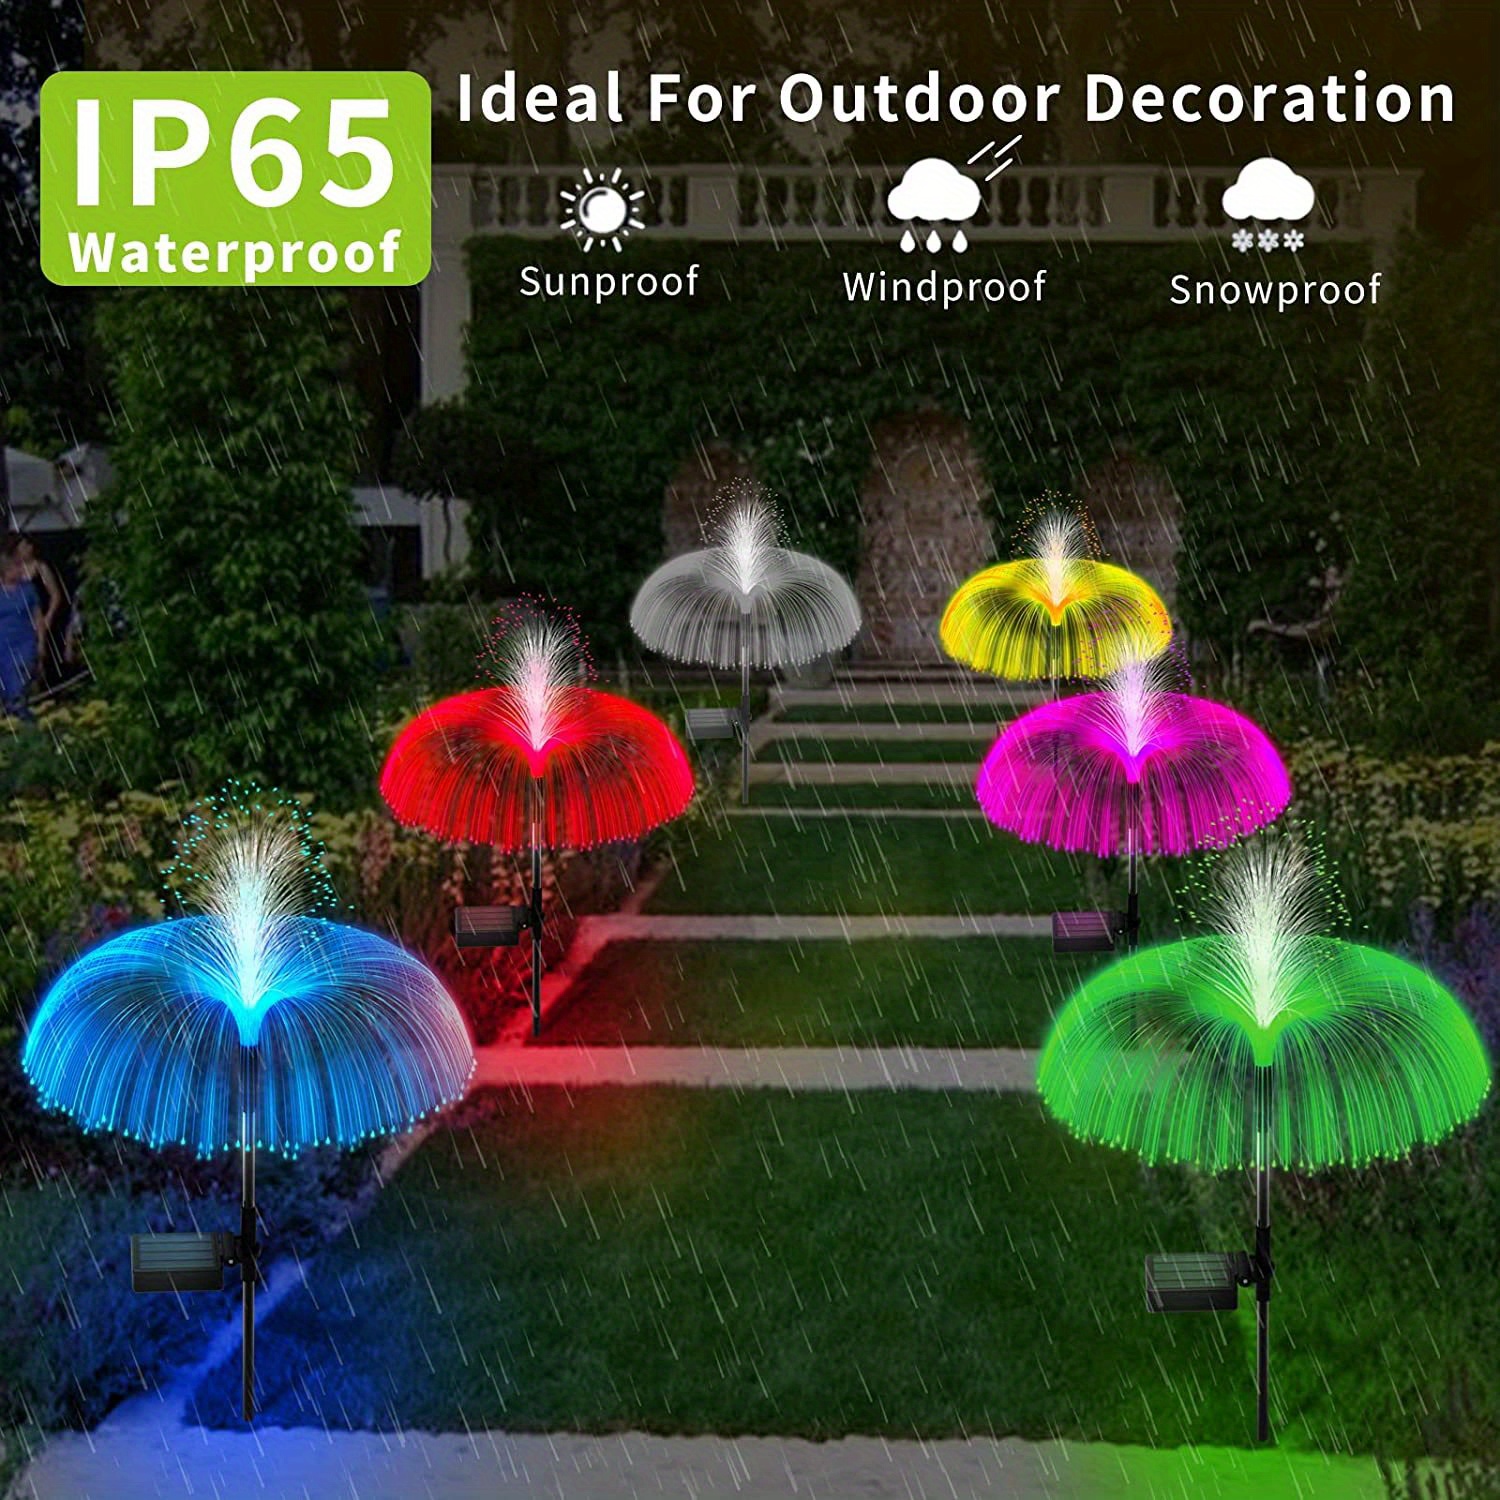 waterproof solar flower fountain lights color changing solar yard light outside decorations solar garden lights stake decor for pathway patio lawn party wedding holiday birthday details 6